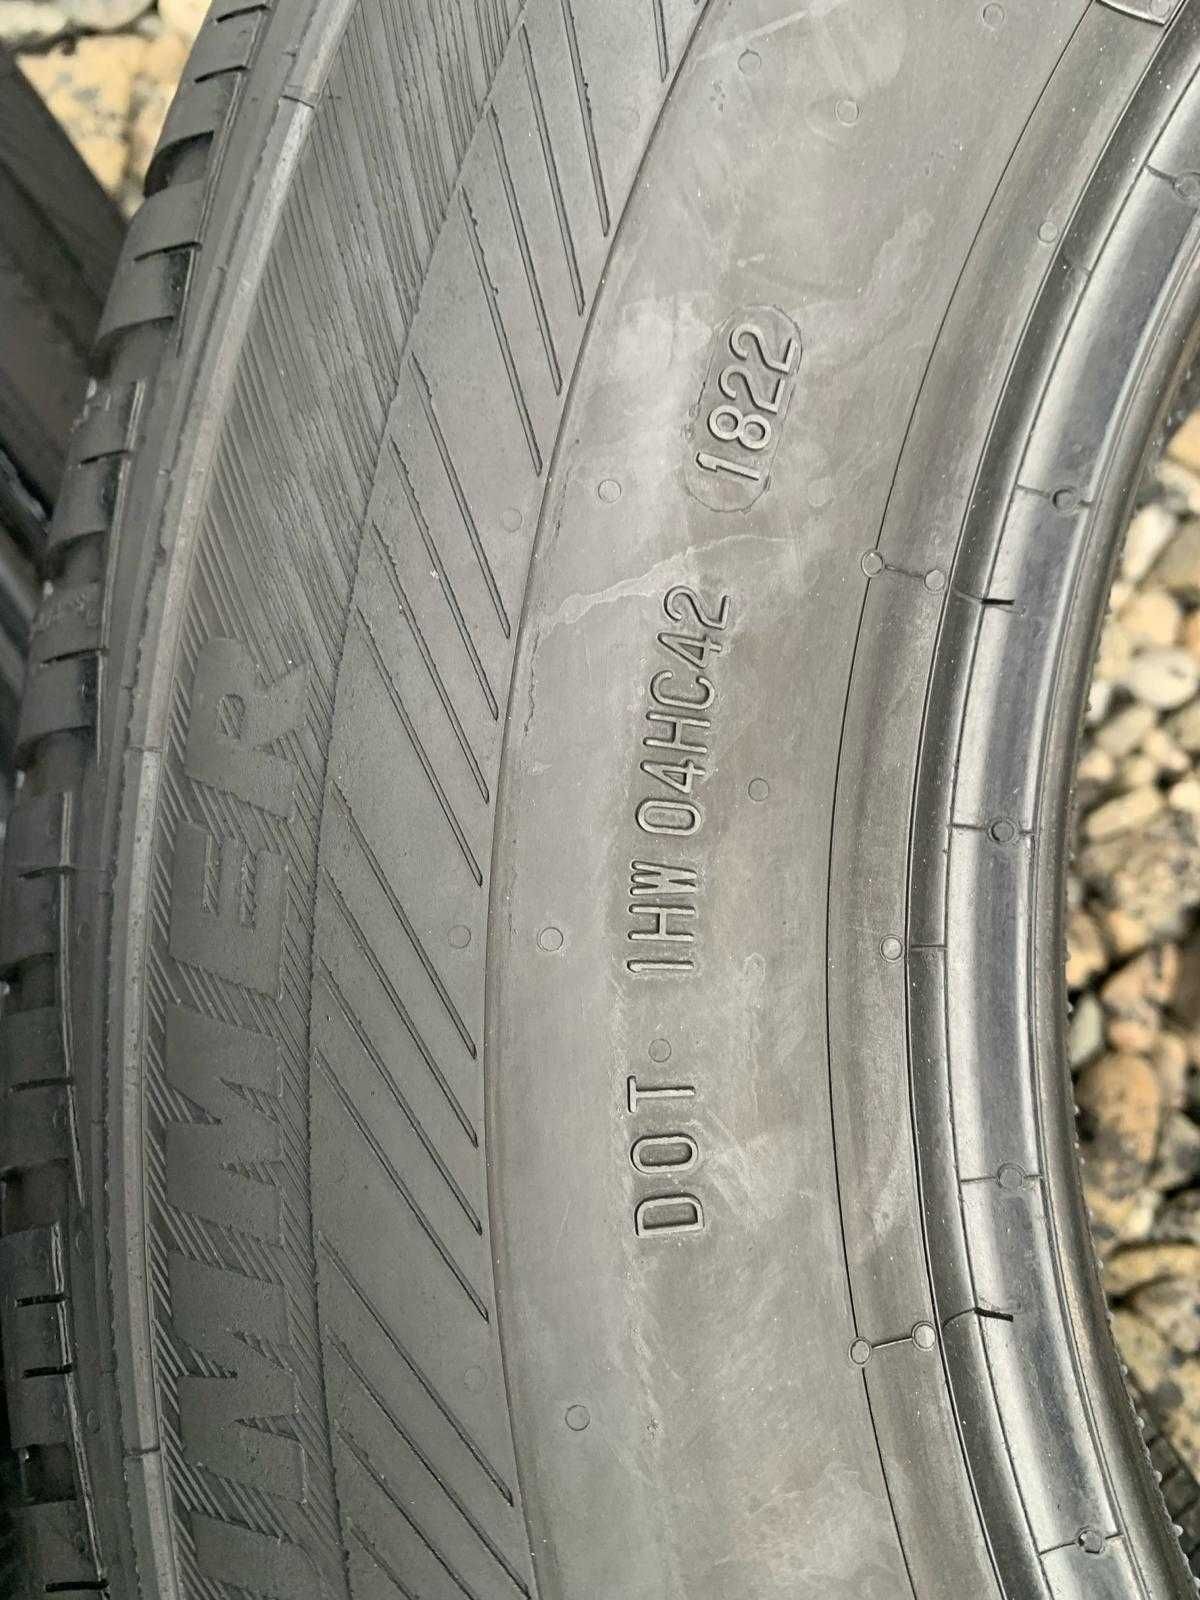 Anvelope 235/65R16C Platin (by Continental)